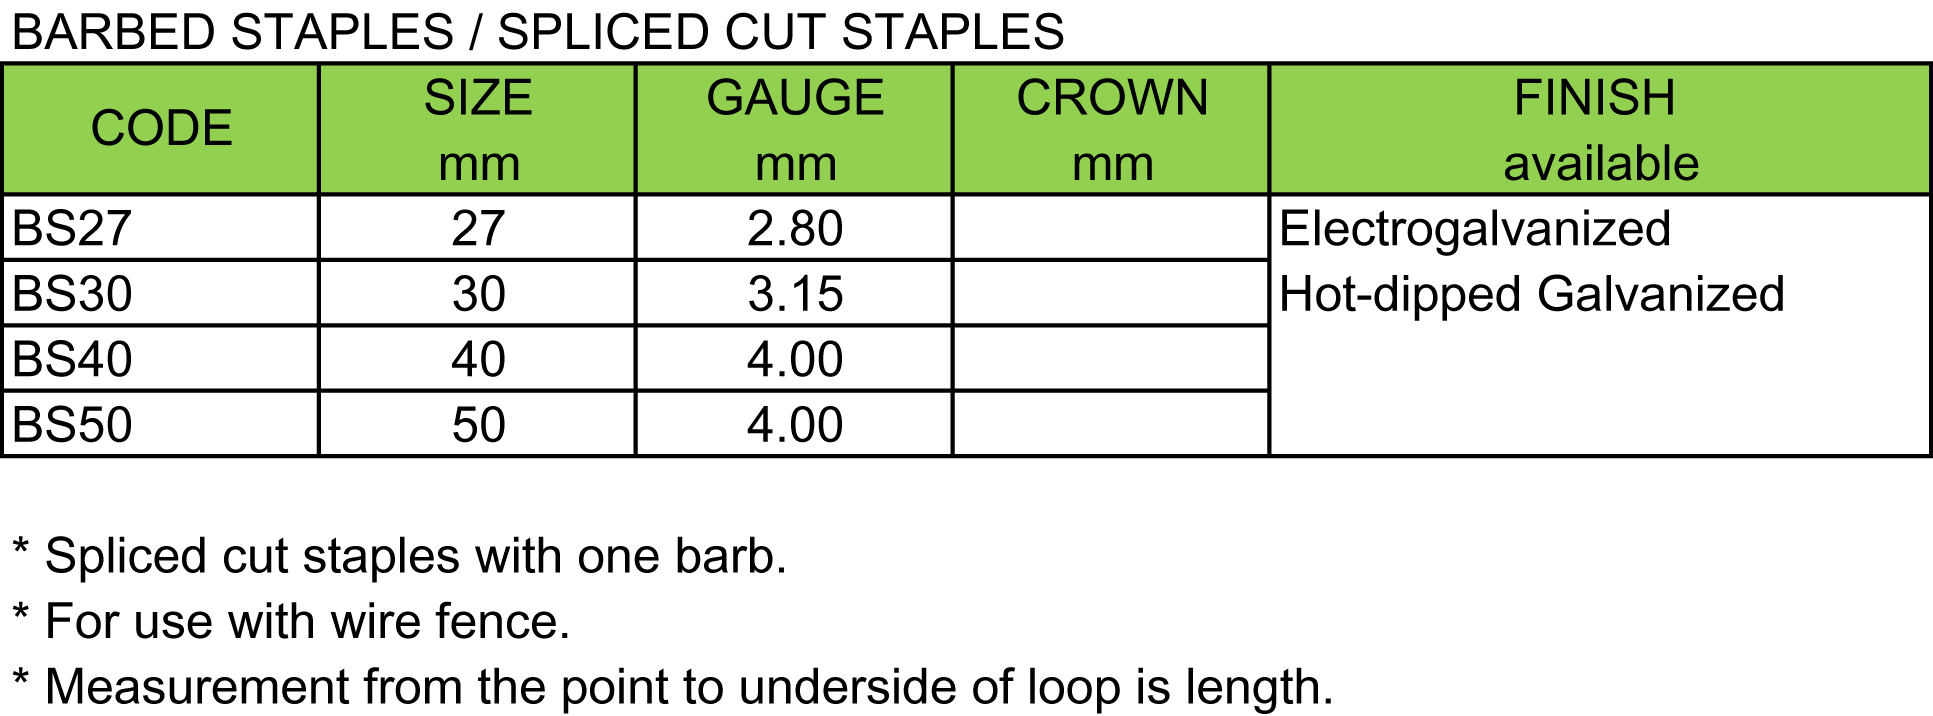 Barbed Staples / Spliced Cut Staples(图1)